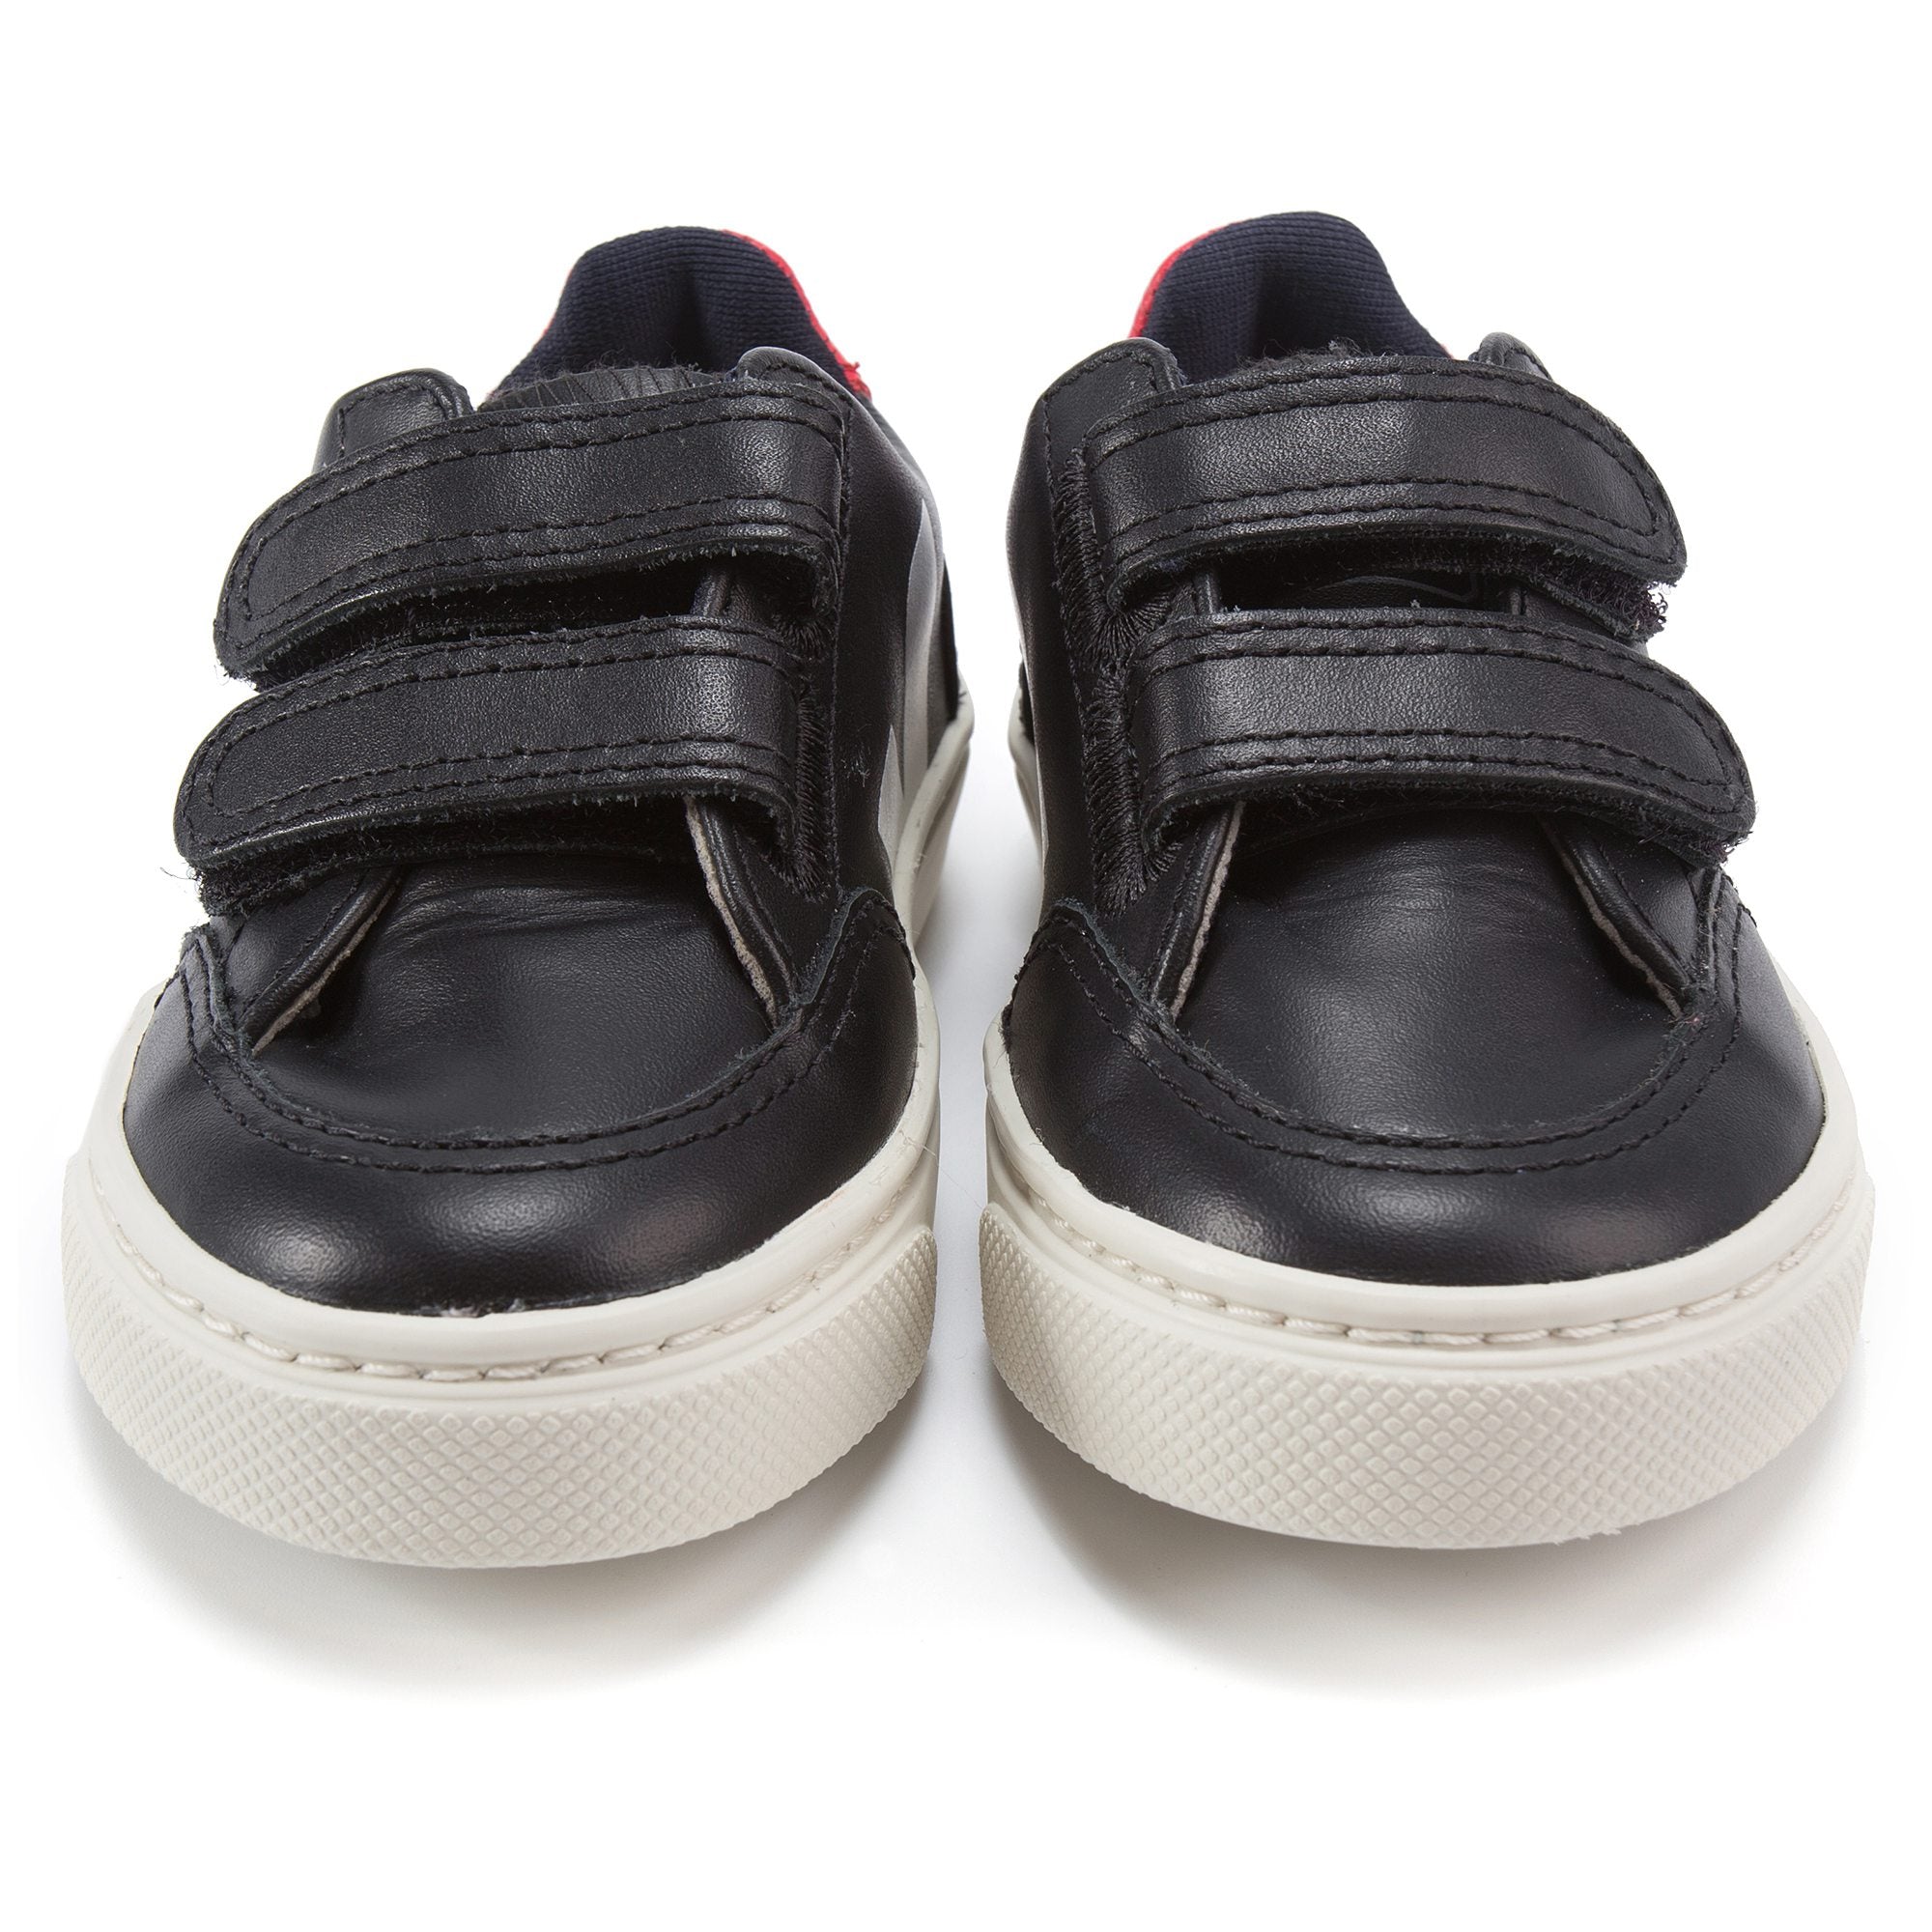 Boys Black Leather Velcro With White "V" Shoes